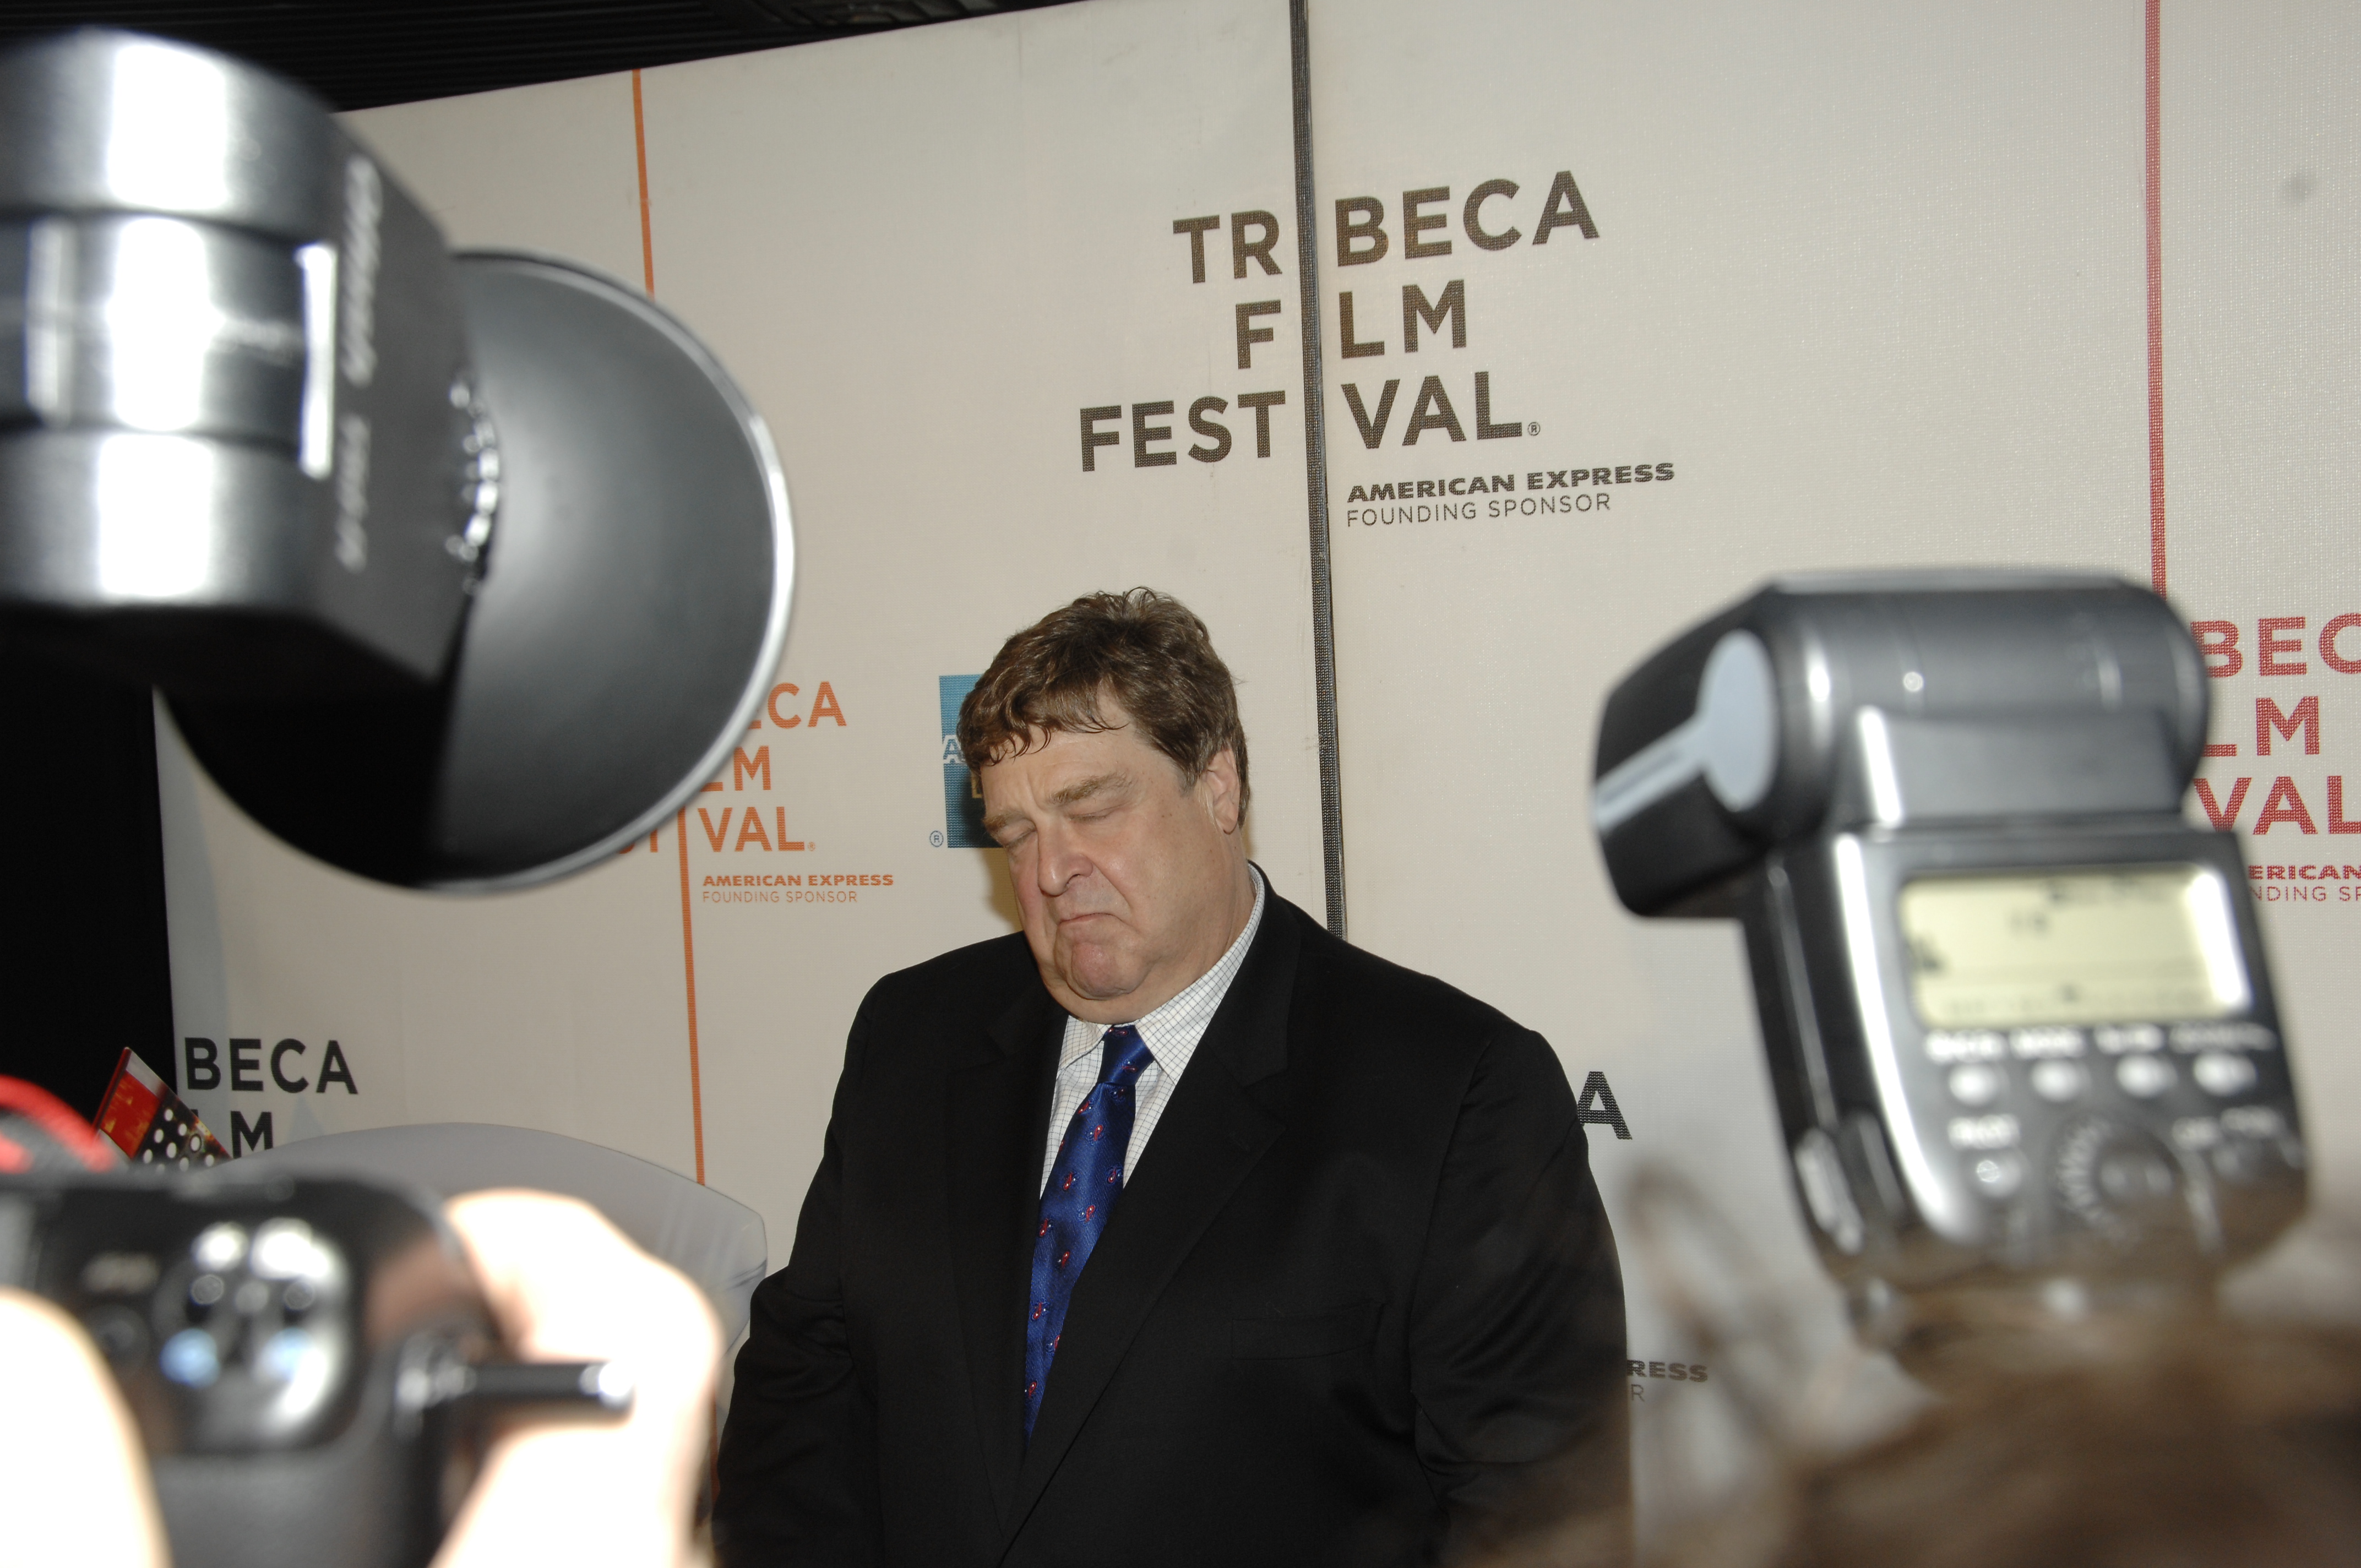 John Goodman at the Tribeca Film Festival screening of "Speed Racer" at 199 Chambers St on May 3, 2008 in New York City | Source: Getty Images